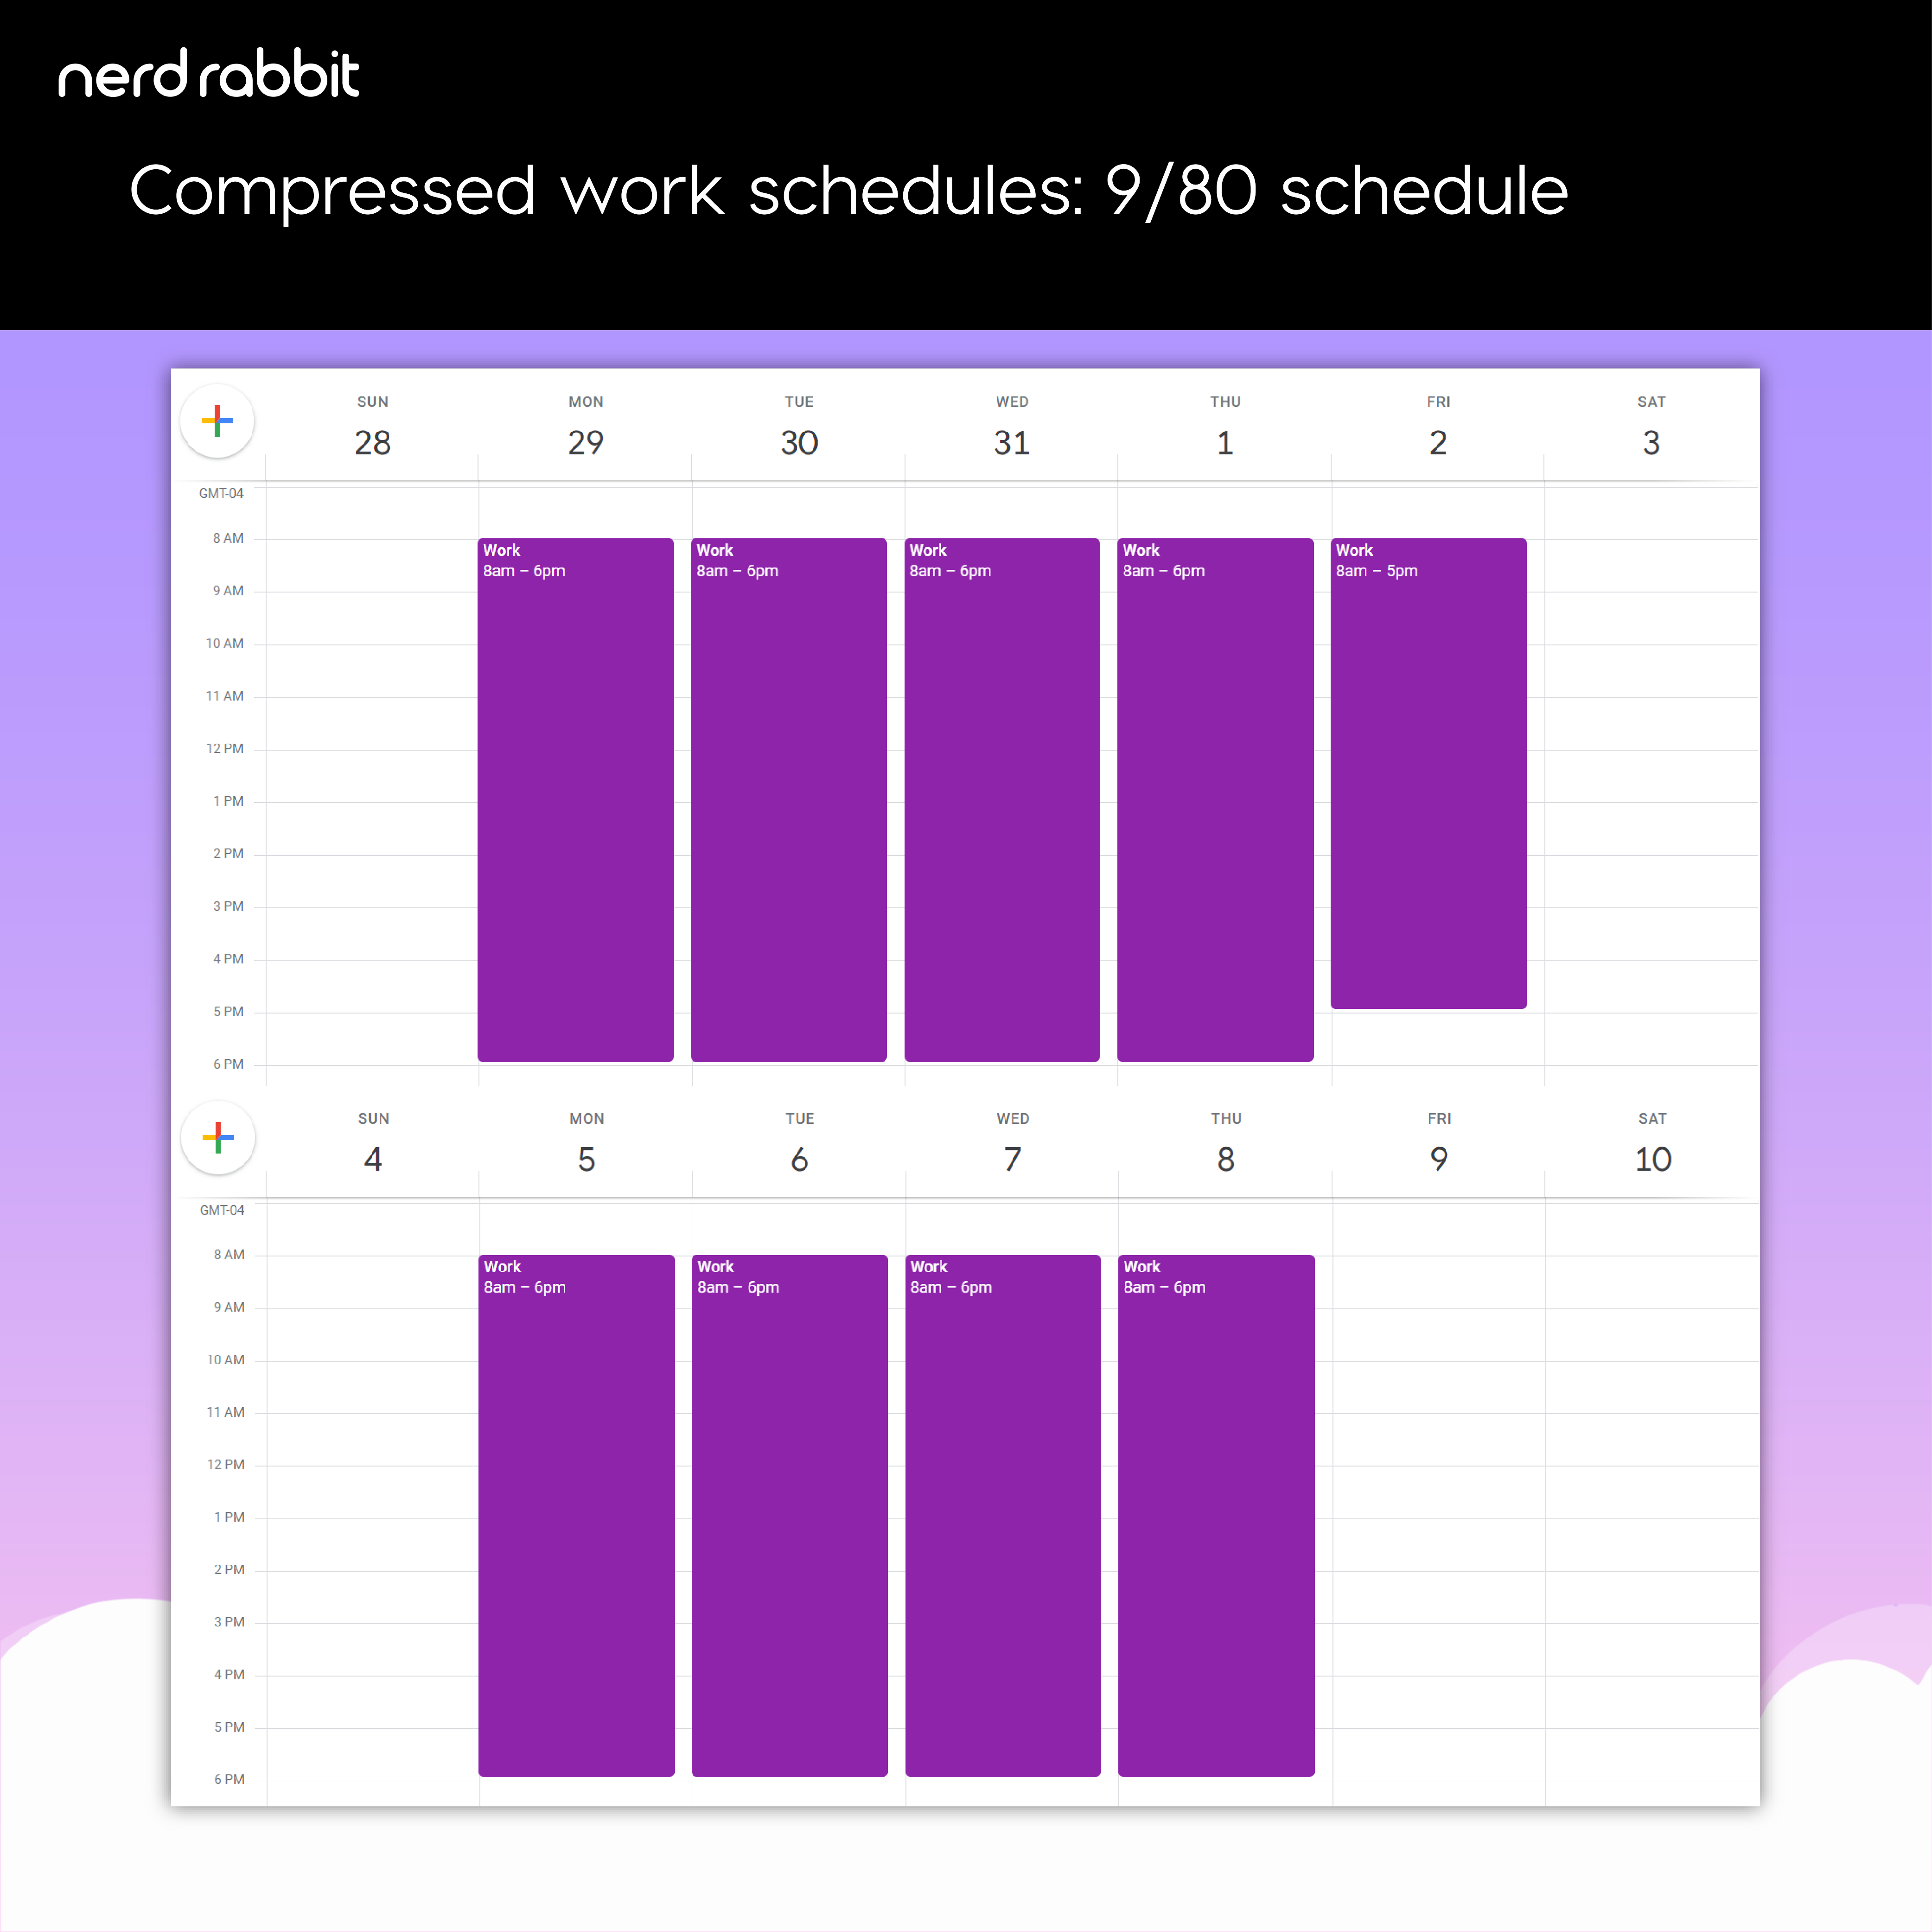 Picture of a 9/80 compressed work schedule.